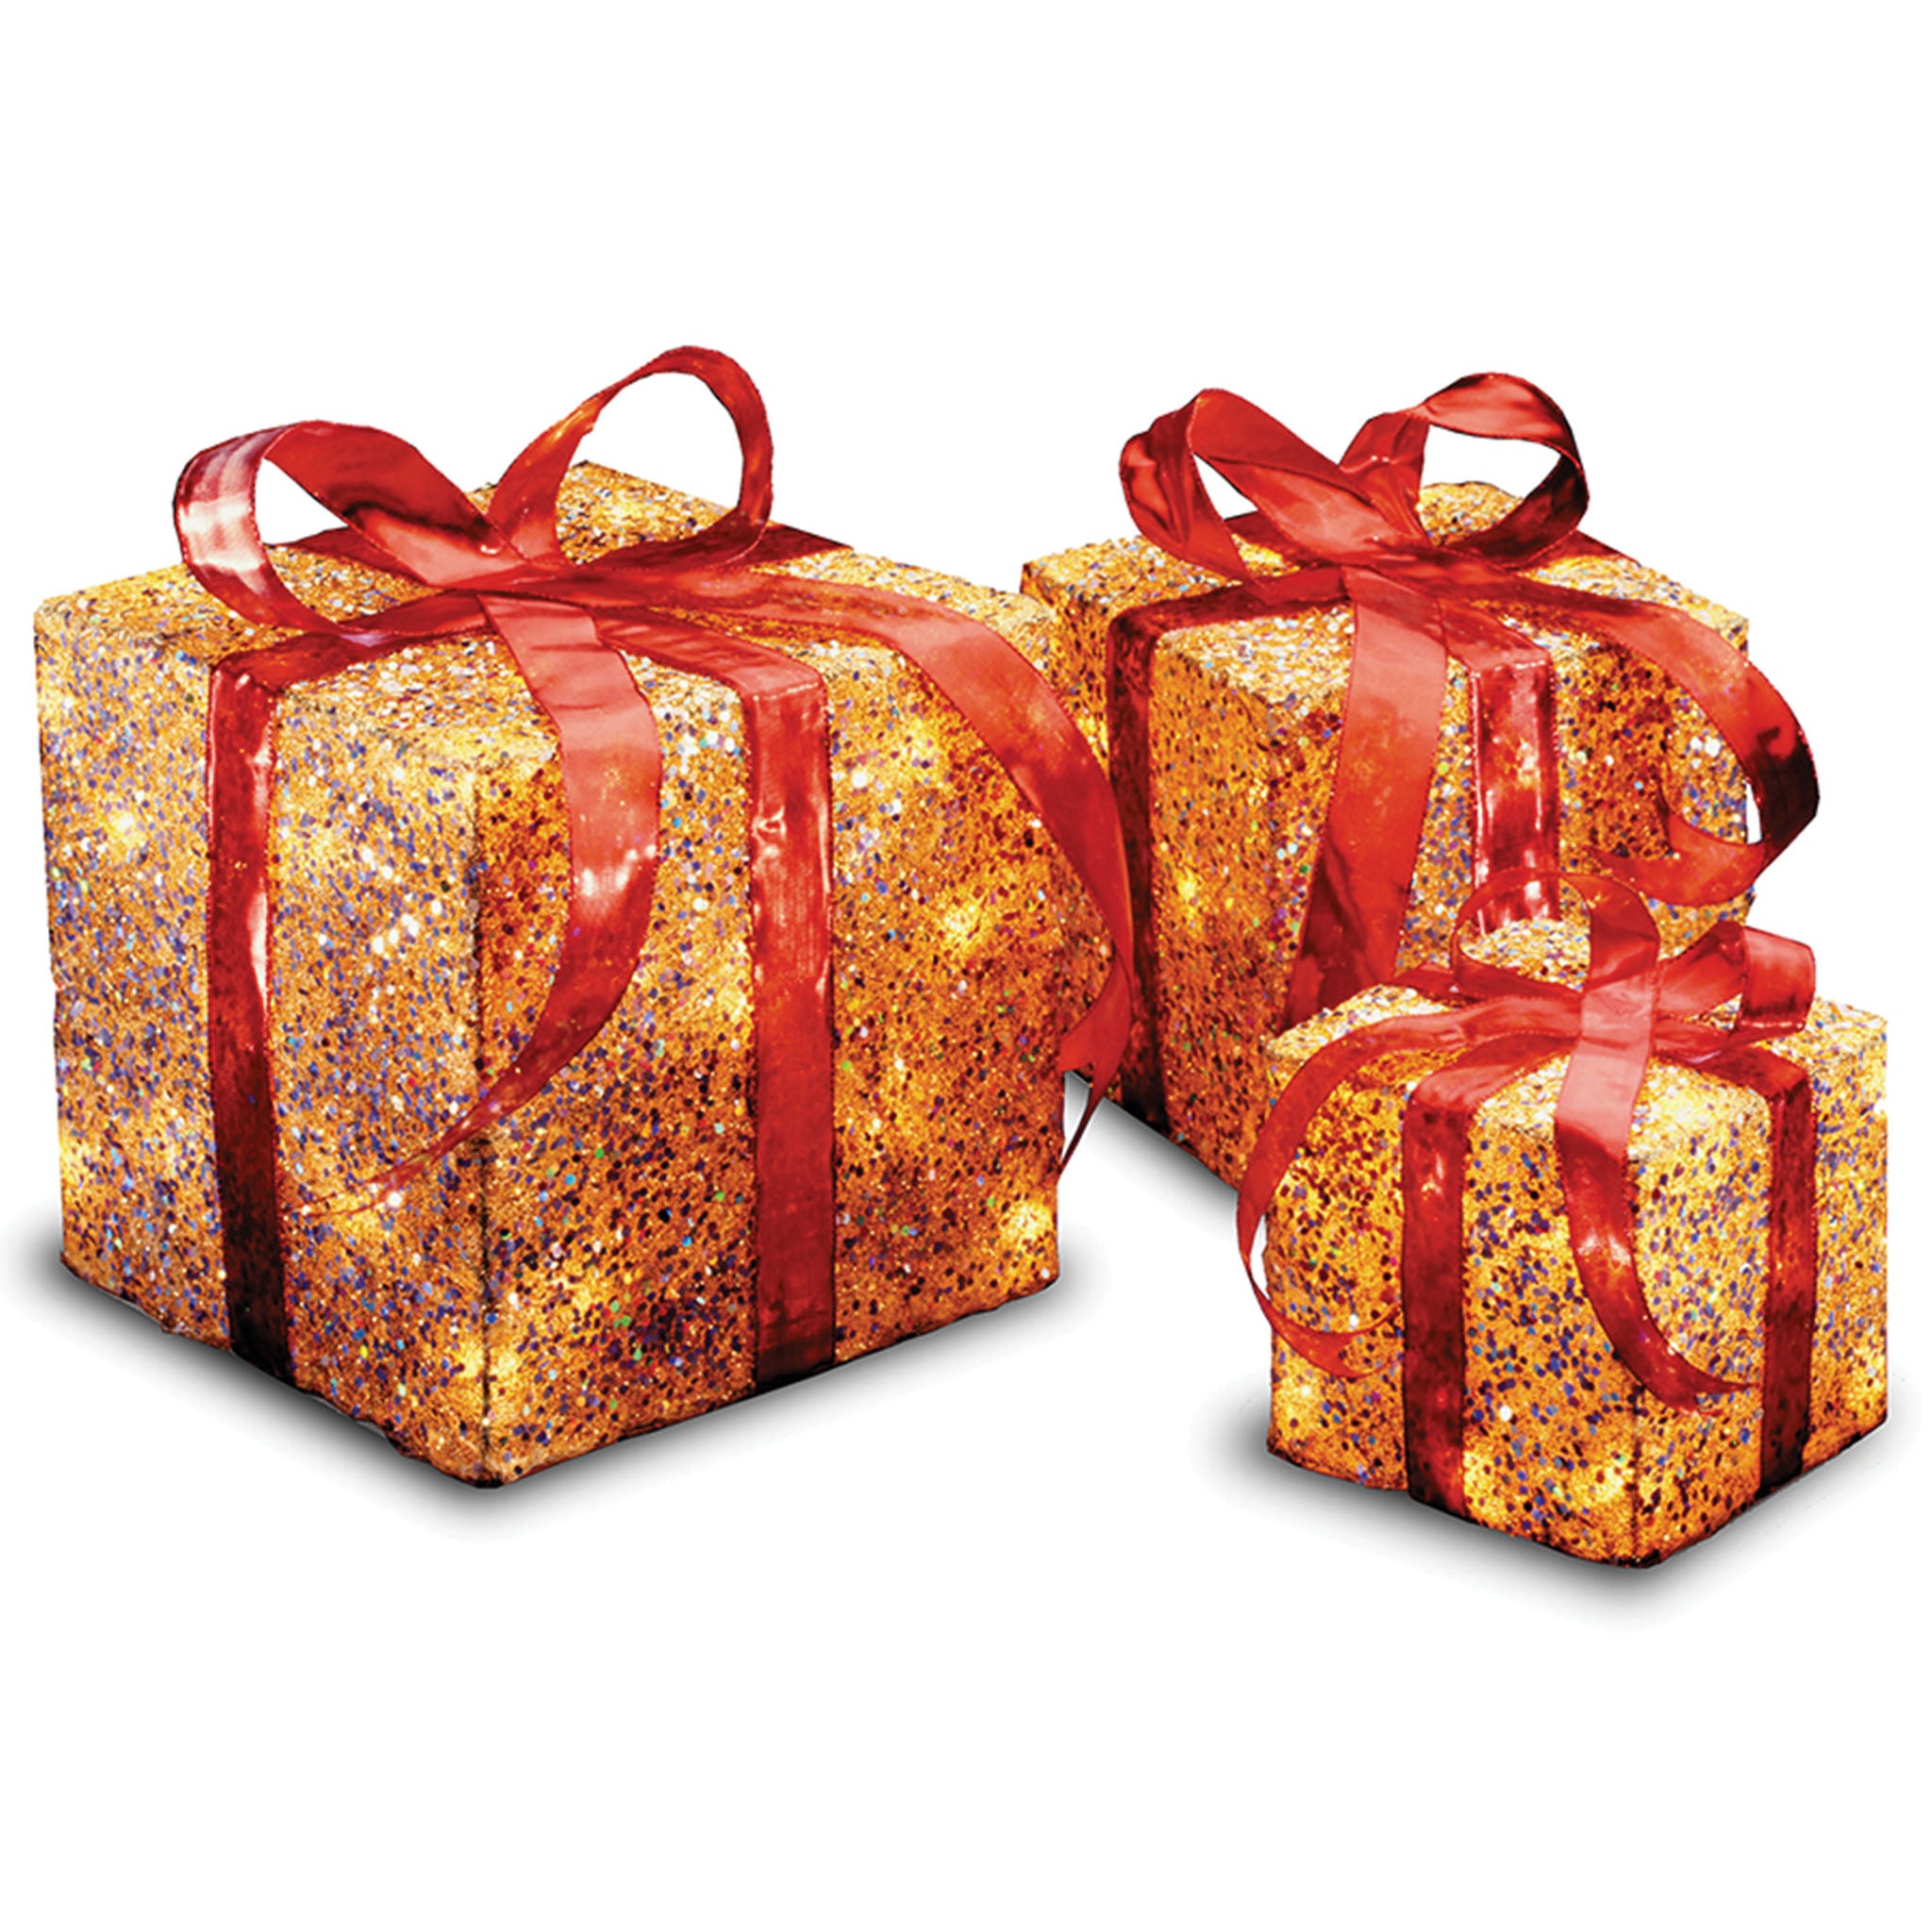 Set of 3 Gold Tinsel Gift Boxes with Red Bows Lighted Christmas Outdoor Decorations